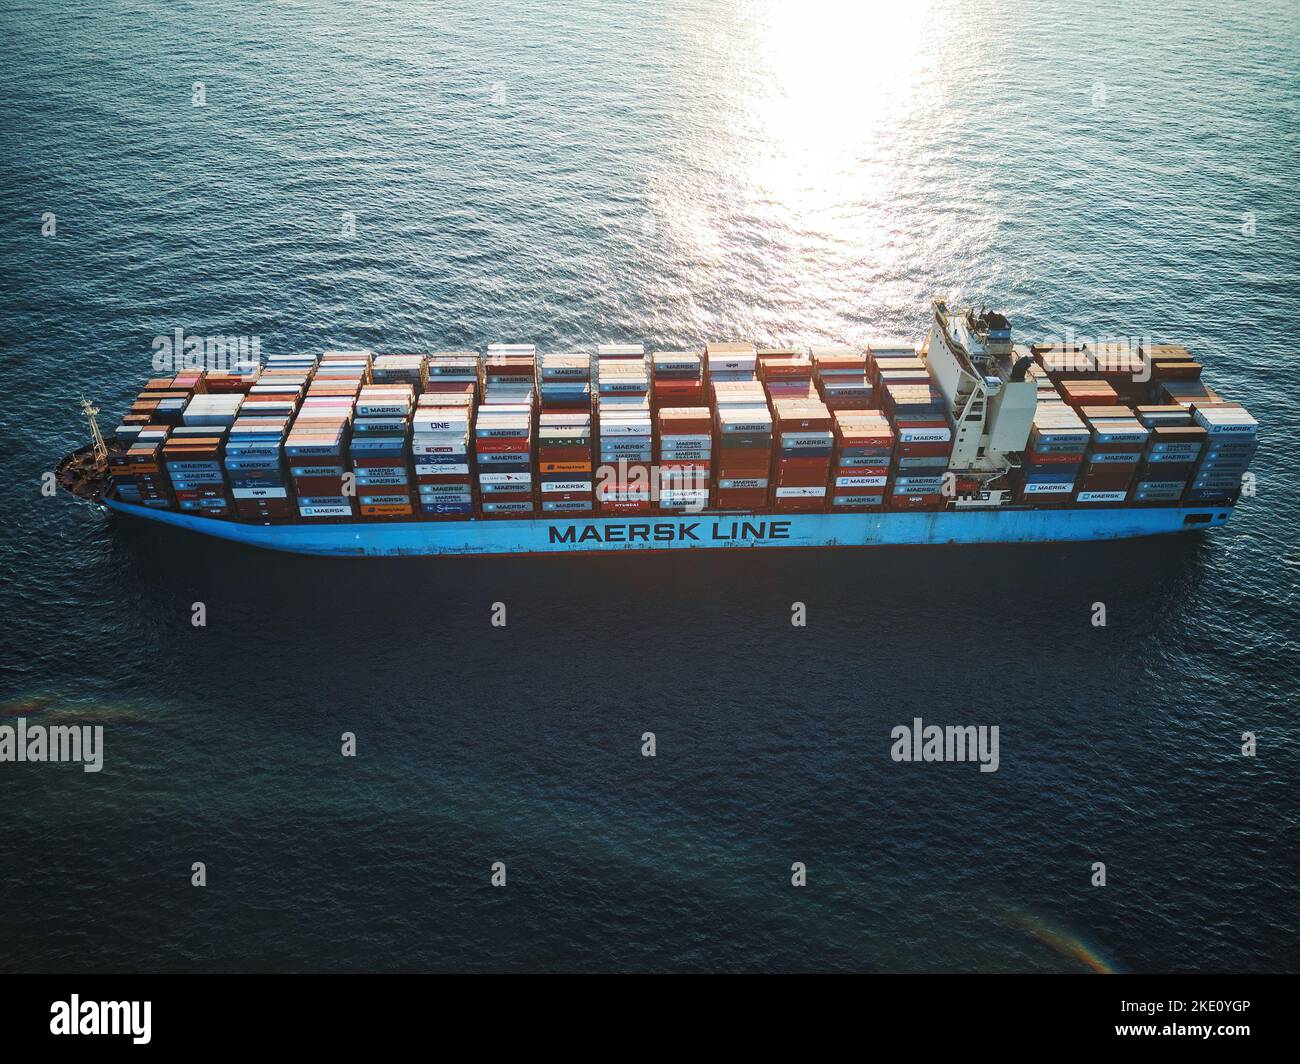 An aerial shot of a Maersk Line tanker in the ocean during sunset Stock Photo